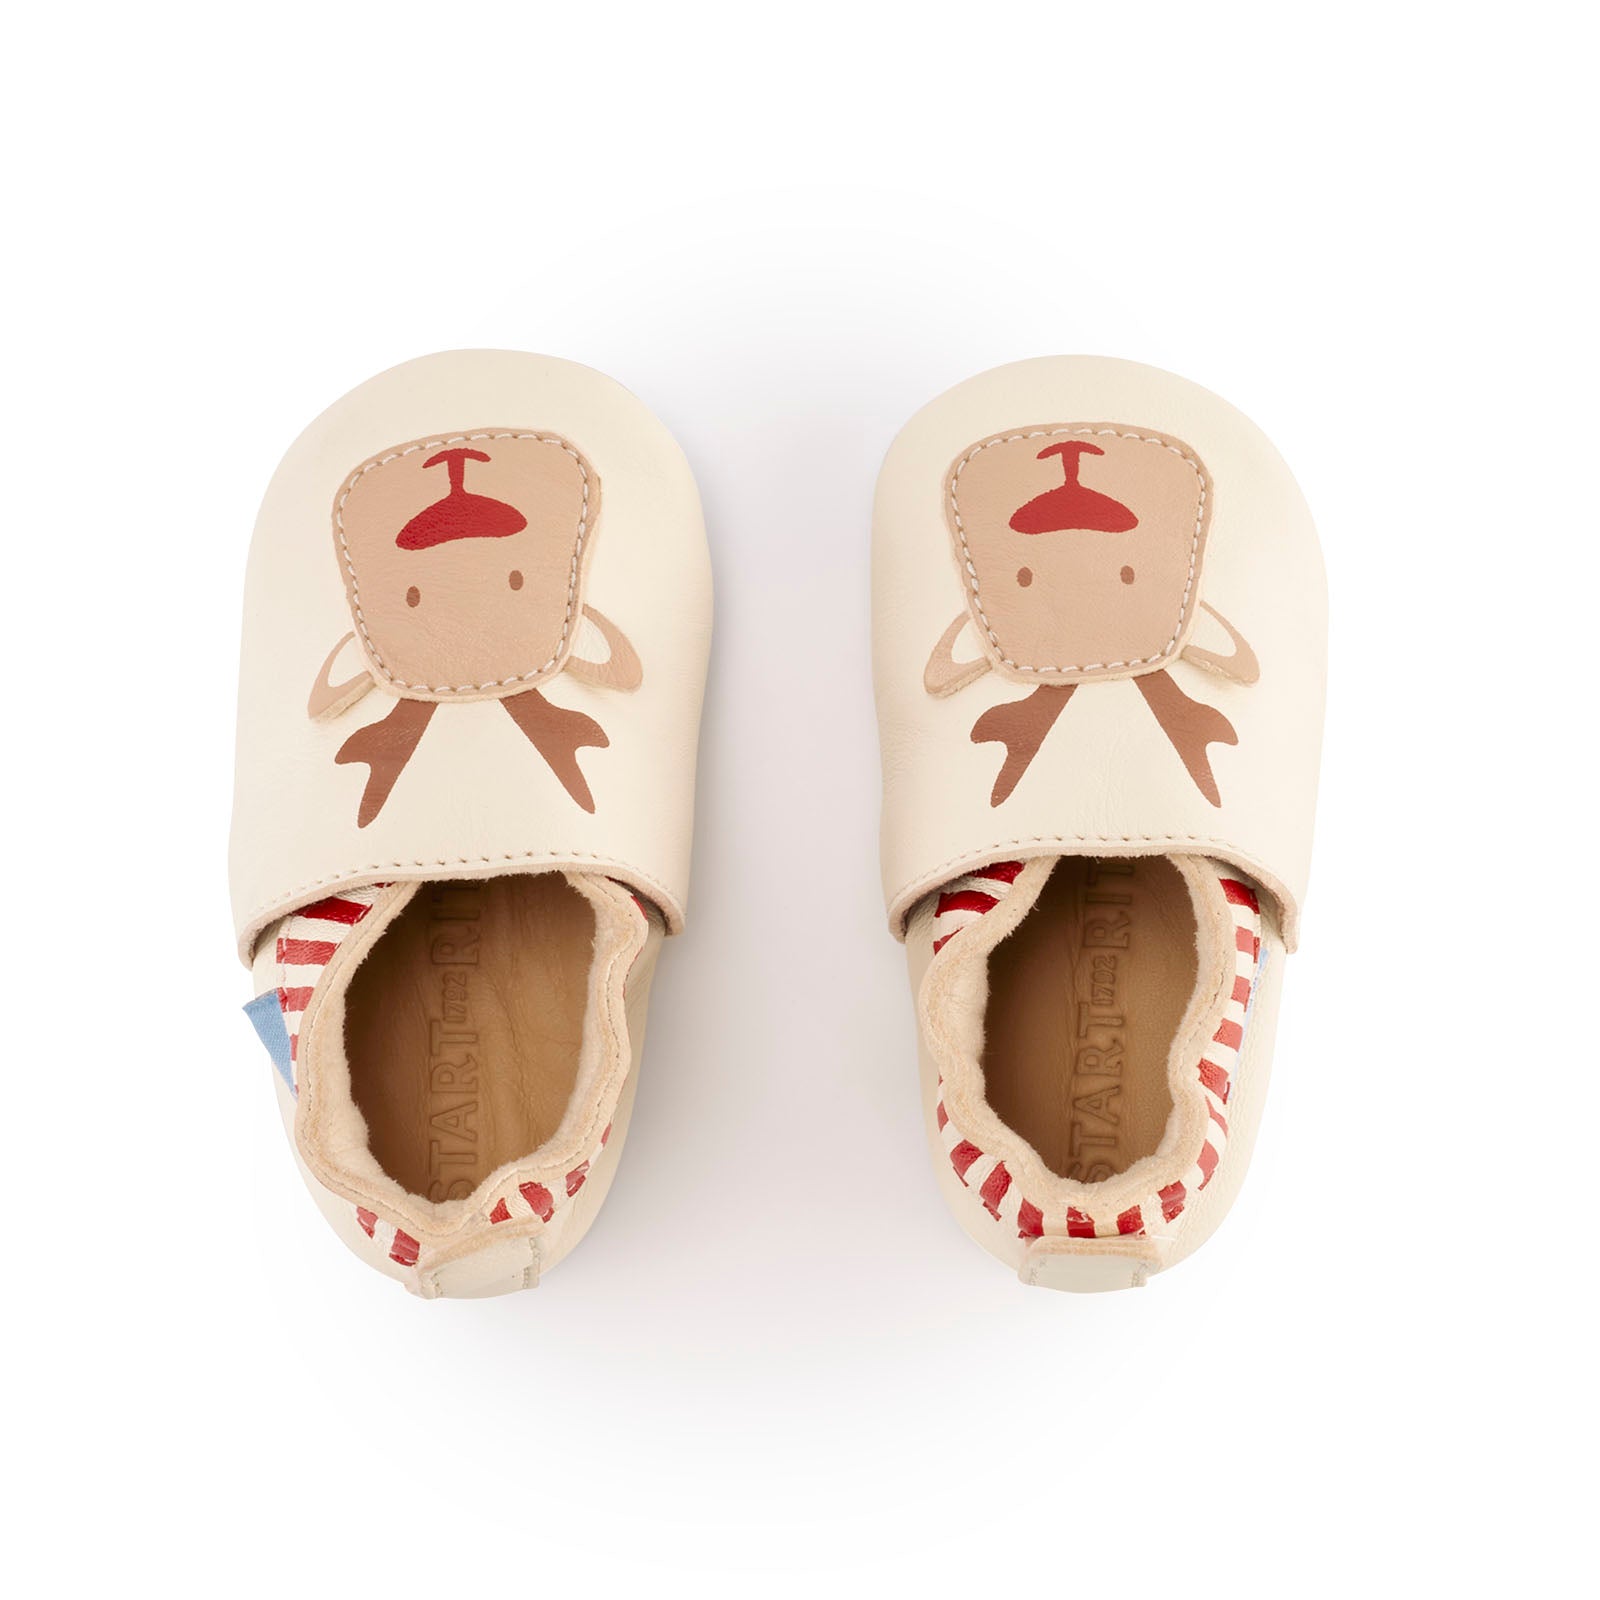 A unisex pram shoe by Start-Rite , style Fable , A slip on Cream and Red Leather Reindeer shoe. Top view of a pair.